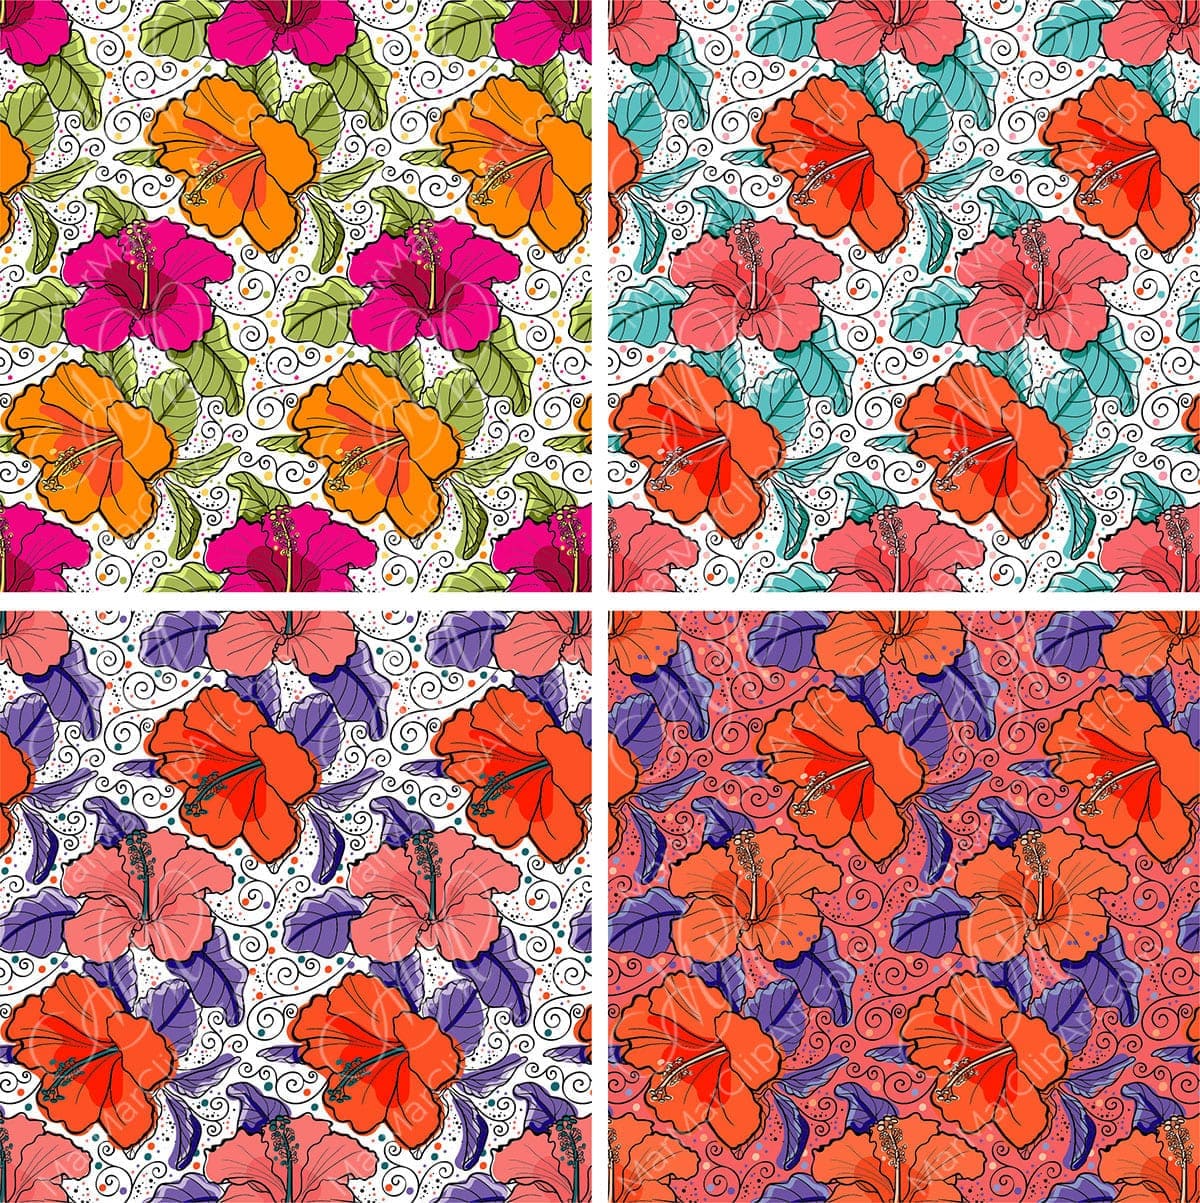 Textile patterns in 4 various color options